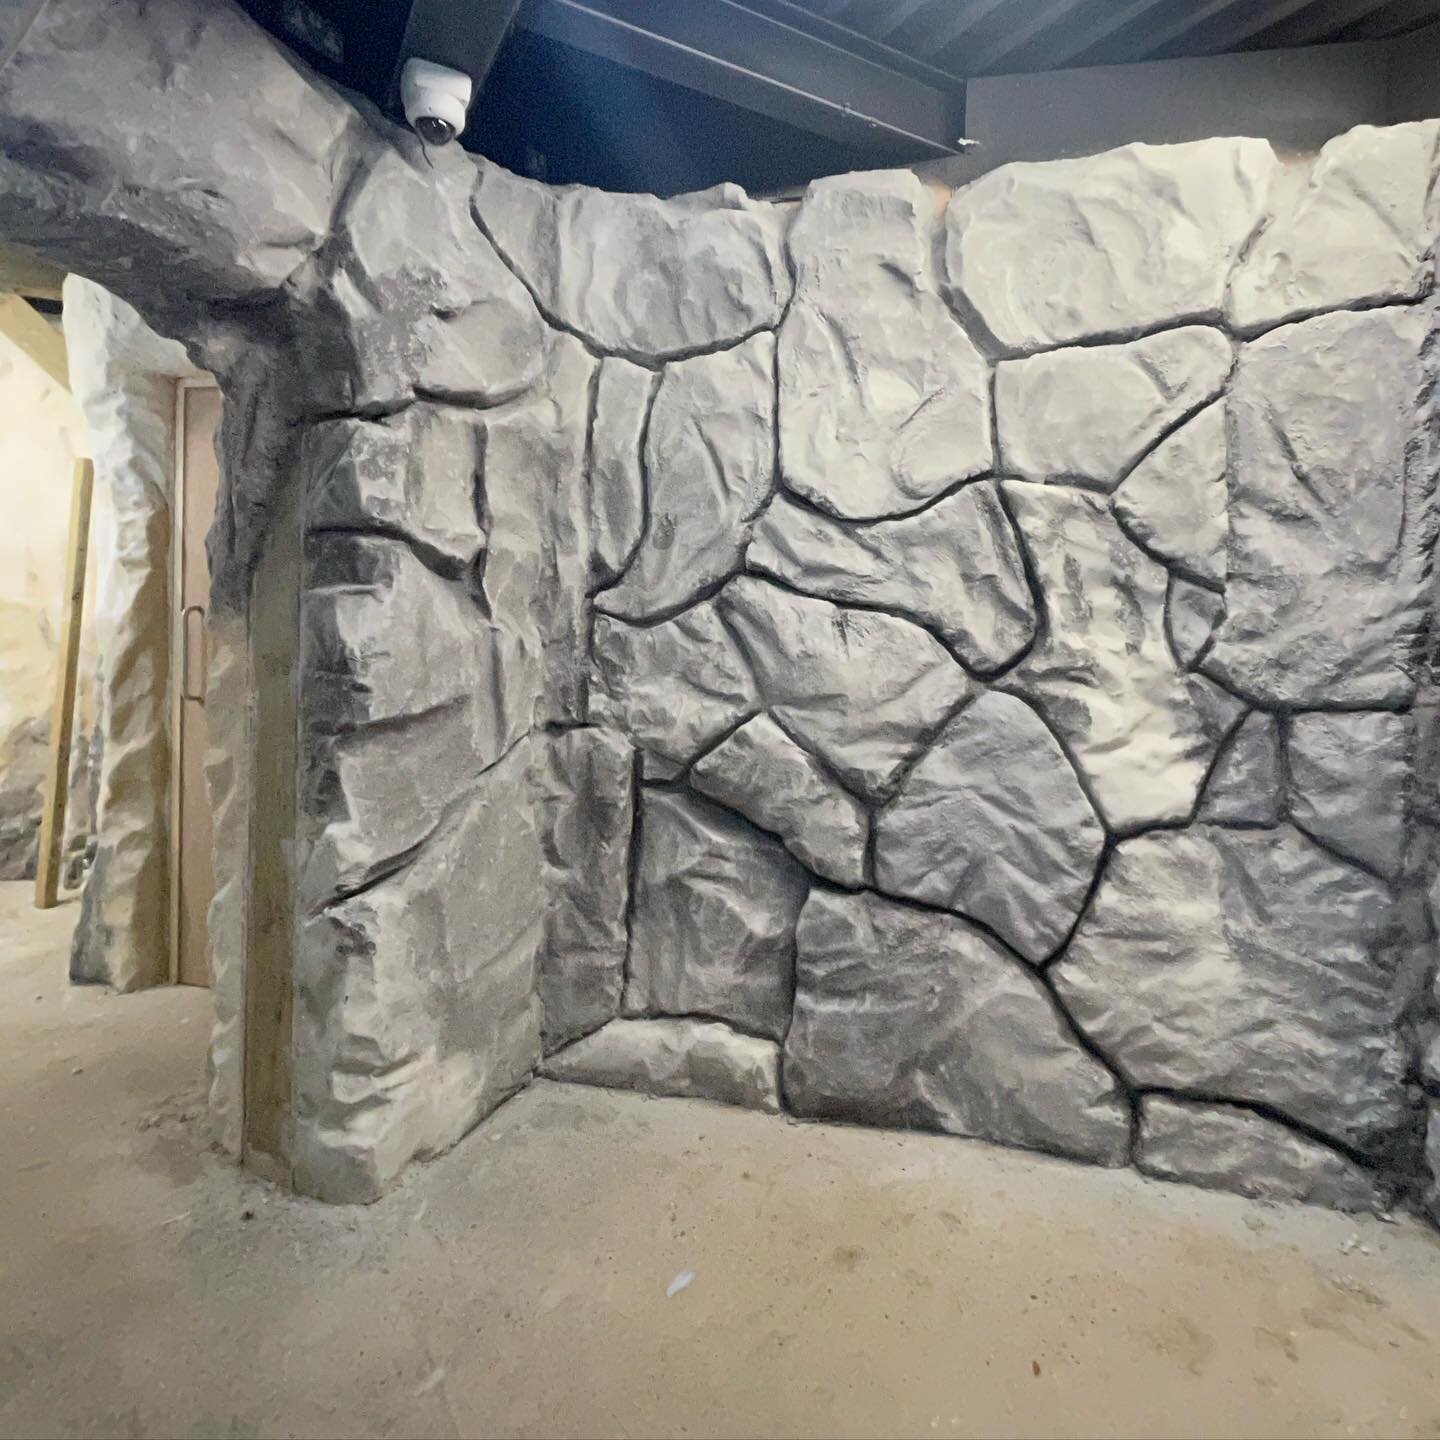 very late but did some scenic work at @chessingtonworldofadventures for @unlockedvision in september for the newly added Enchanted Hollow for the halloween season. fibreglassing, sanding + jesmonite coating poly walls carved by the rest of the amazin